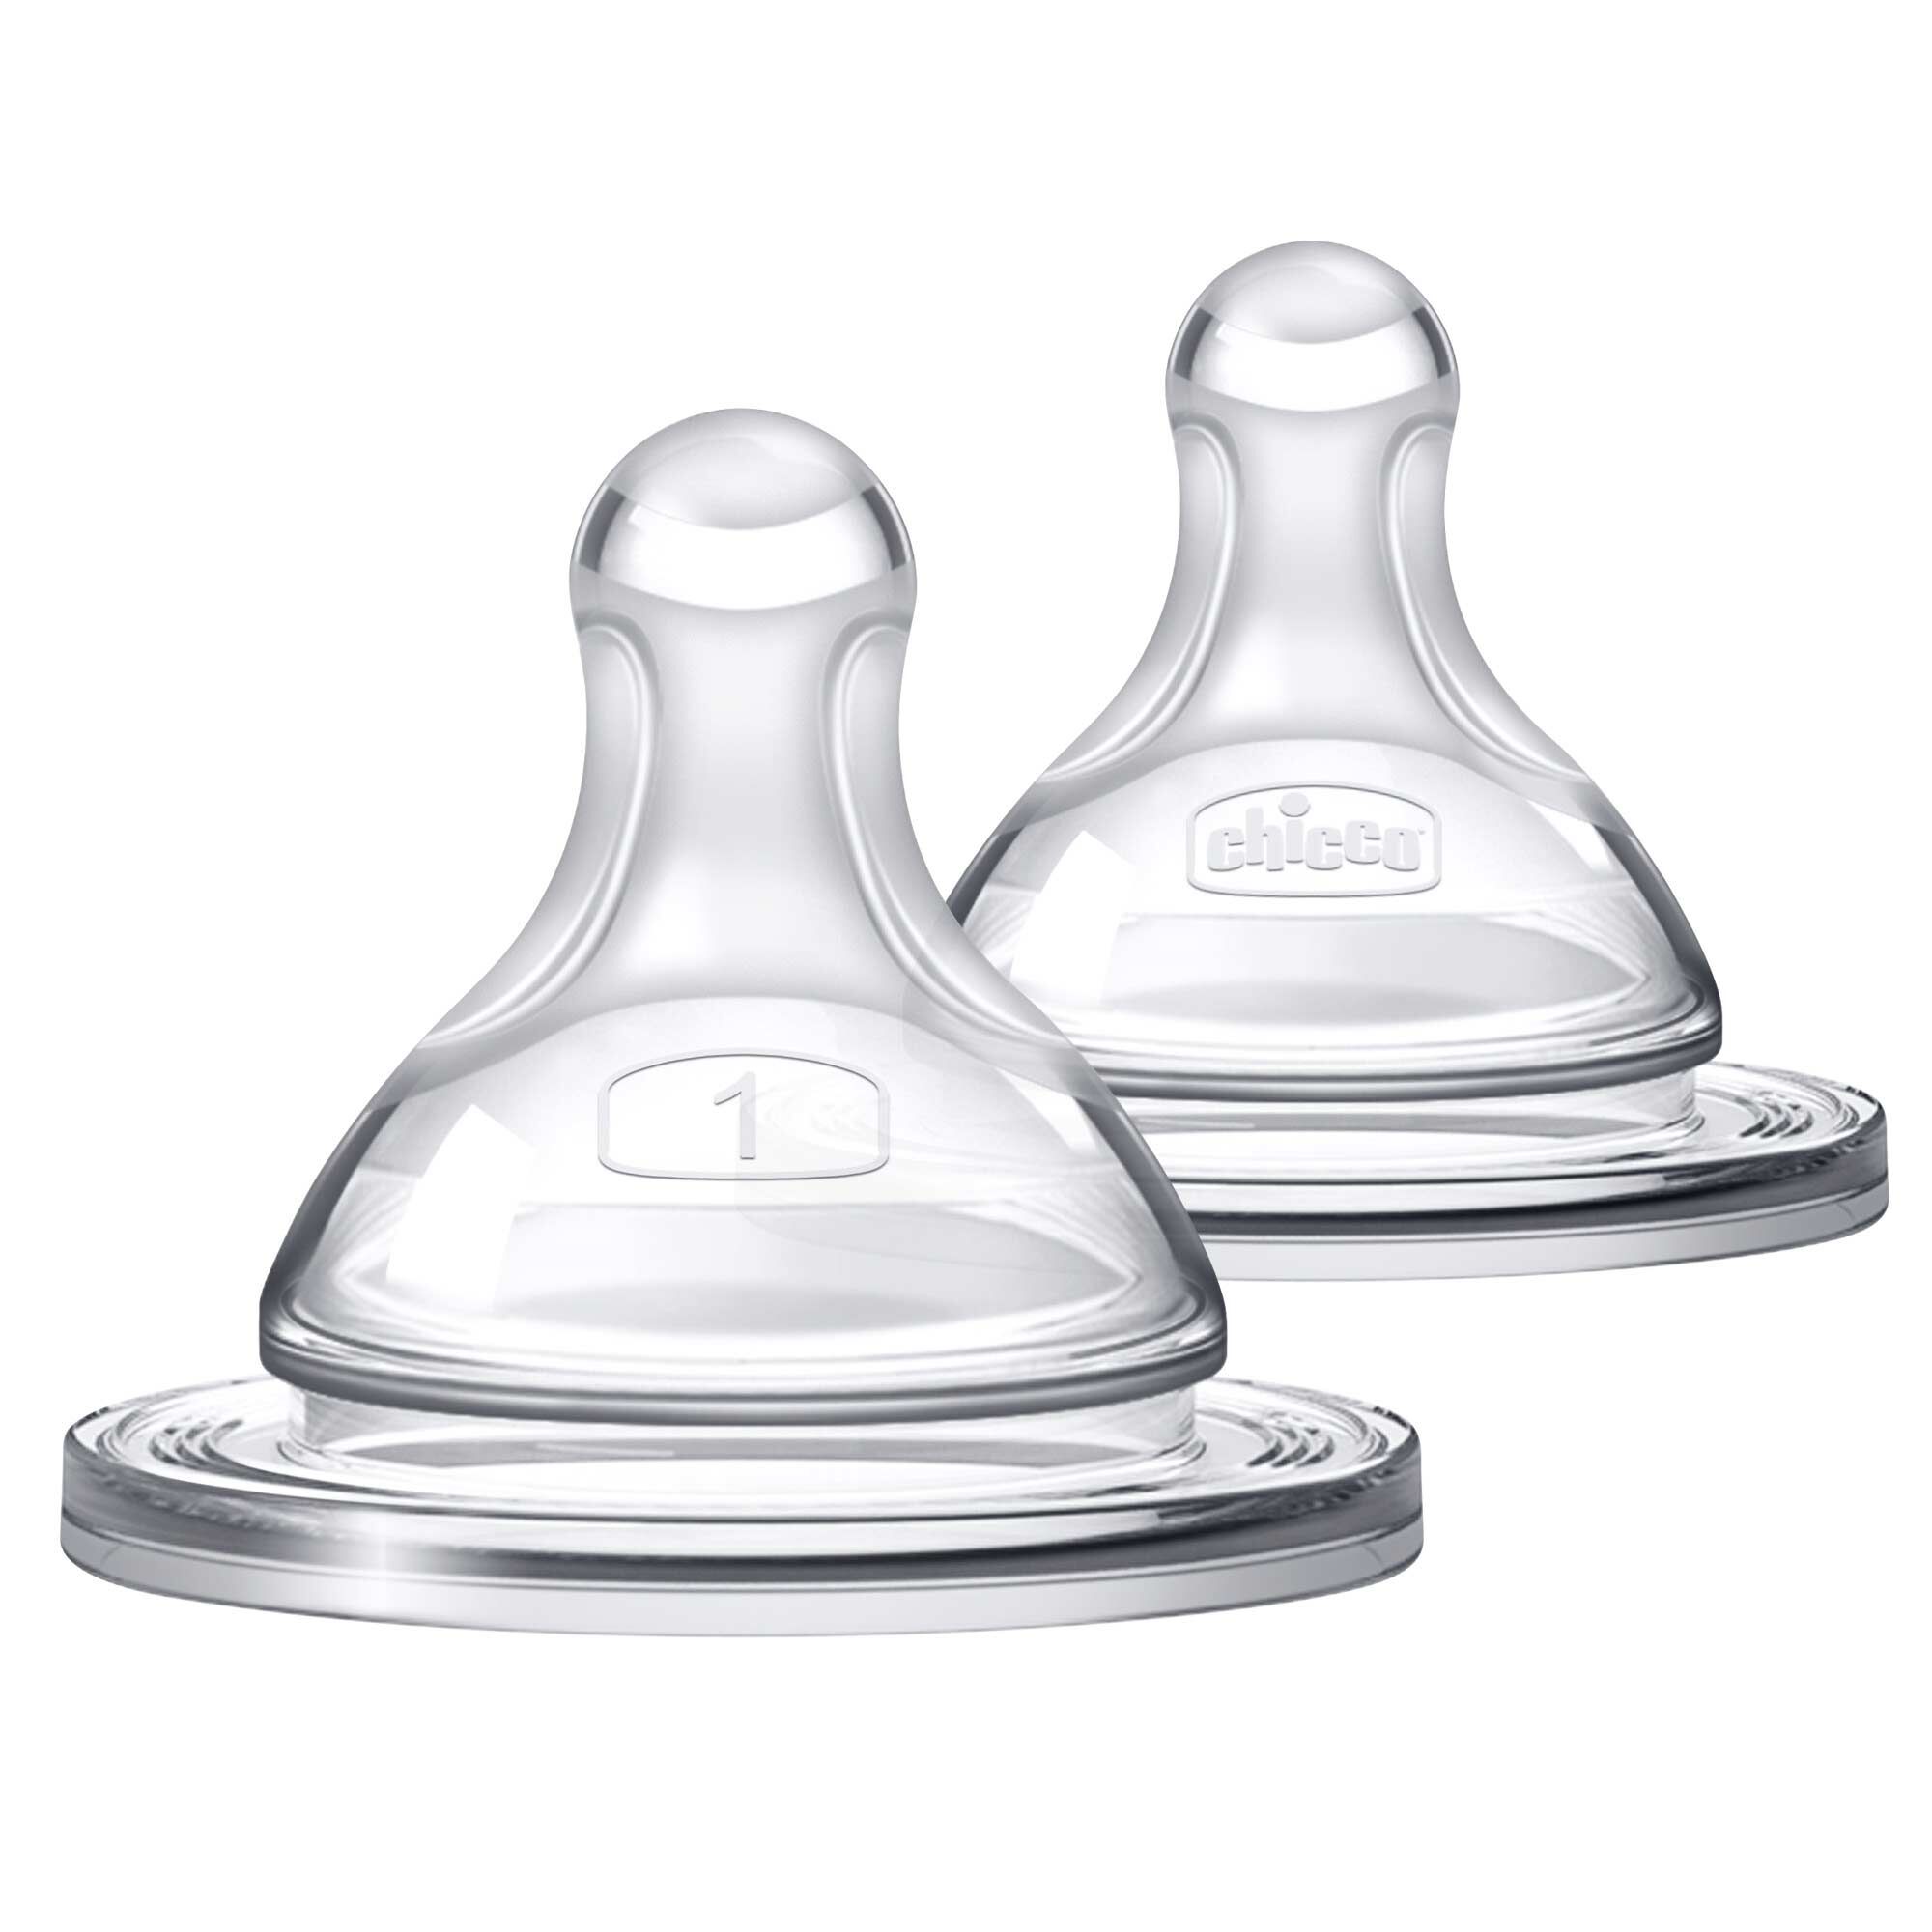 https://www.chiccousa.com/dw/image/v2/AAMT_PRD/on/demandware.static/-/Sites-chicco_catalog/default/dwb85e8430/images/products/feeding/duo-bottle/chicco-duo-bottle-slow-flow-nipples-2pk.jpg?sw=2000&sh=2000&sm=fit